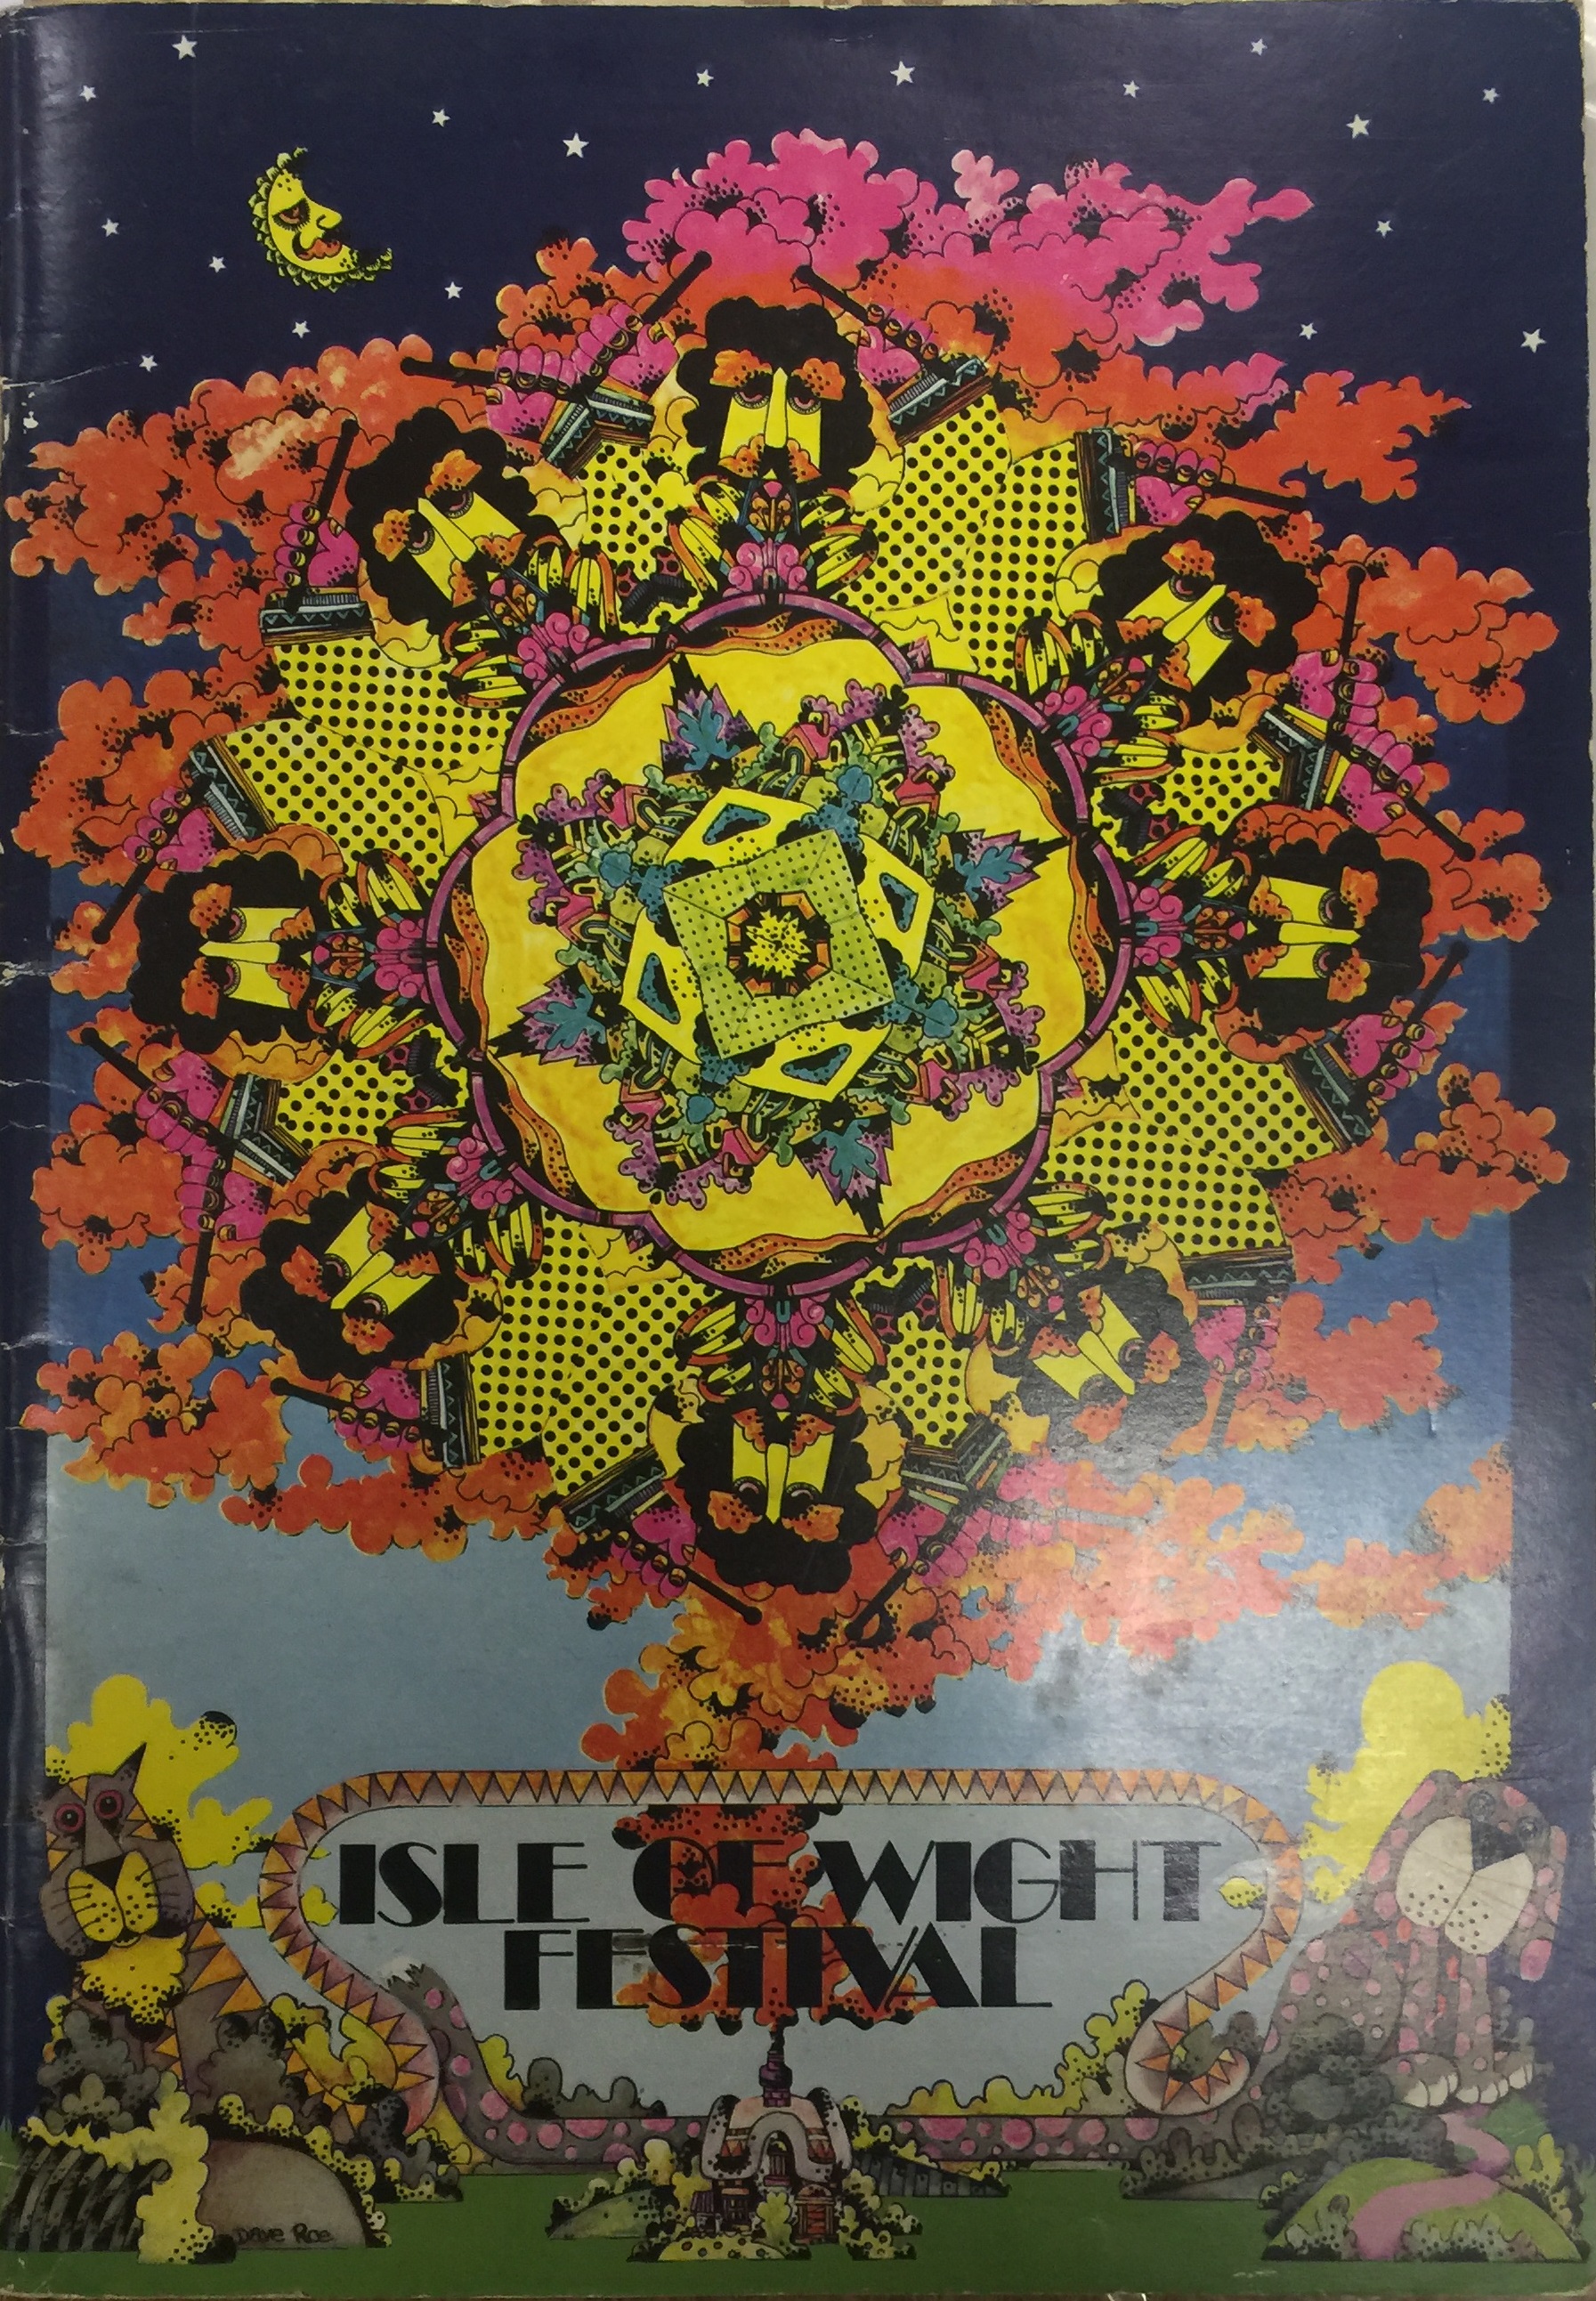 OZ MAGAZINE POSTERS/POSTCARDS - ISLE OF WIGHT FESTIVAL PROGRAMME. - Image 5 of 6